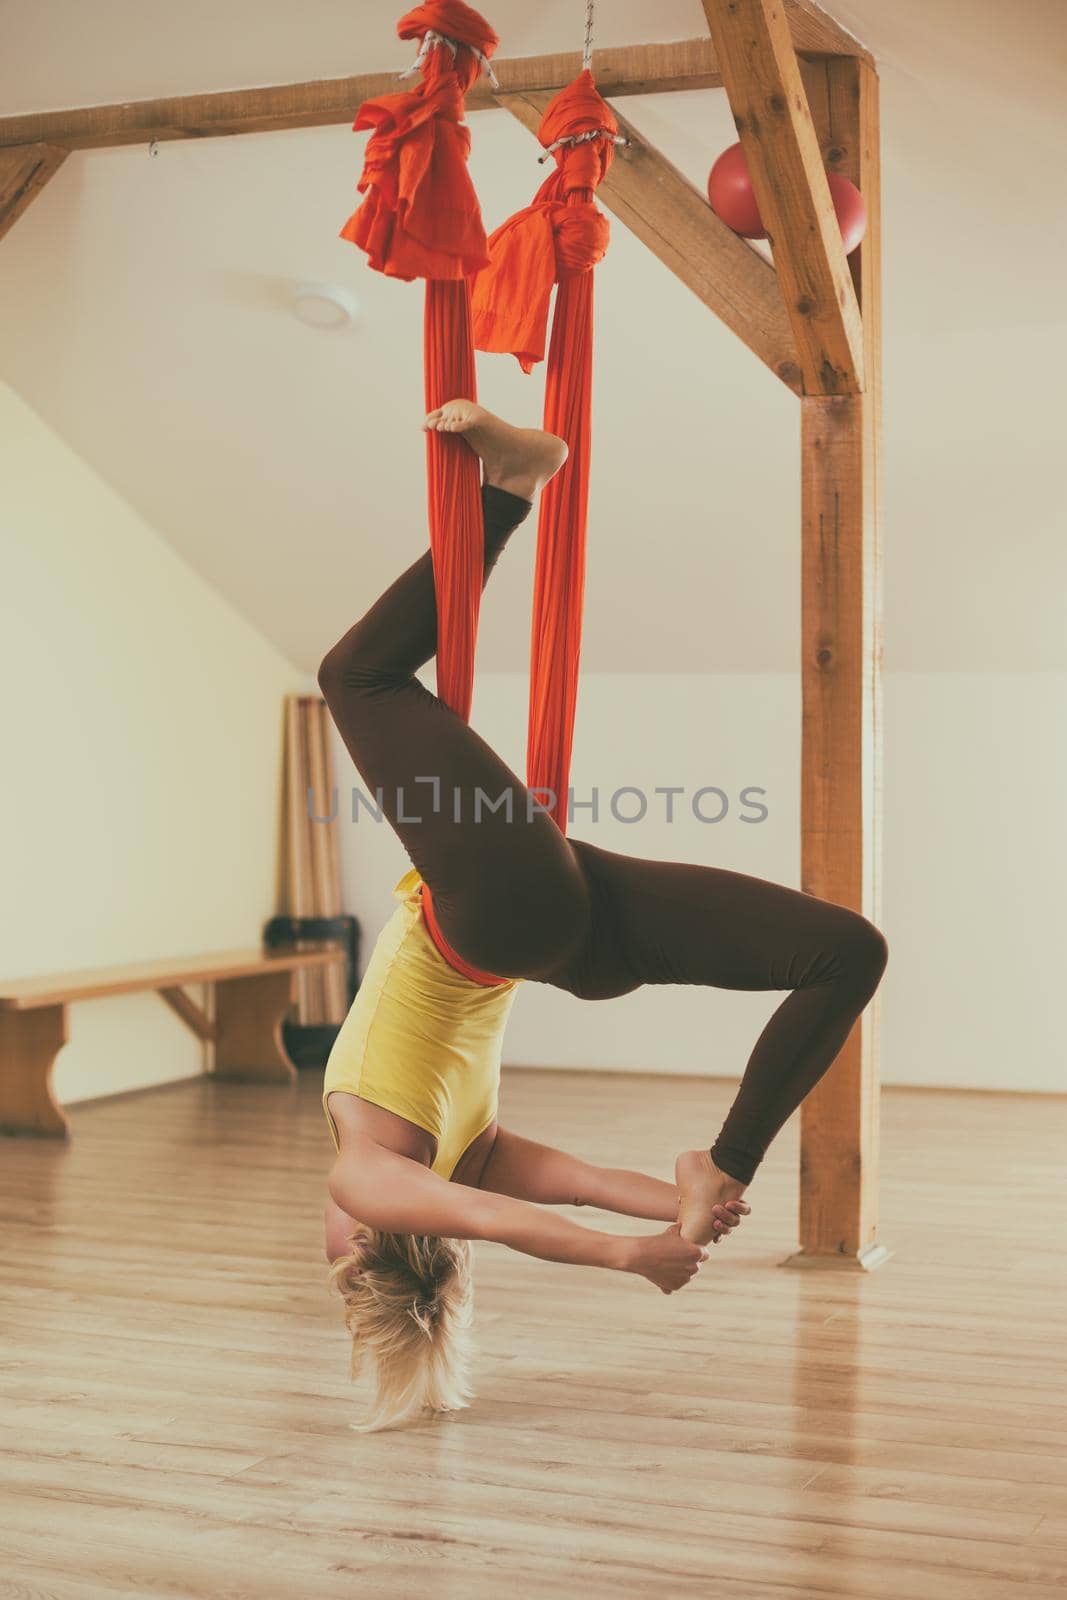 Woman doing aerial yoga in the fitness studio.Image is intentionally toned.